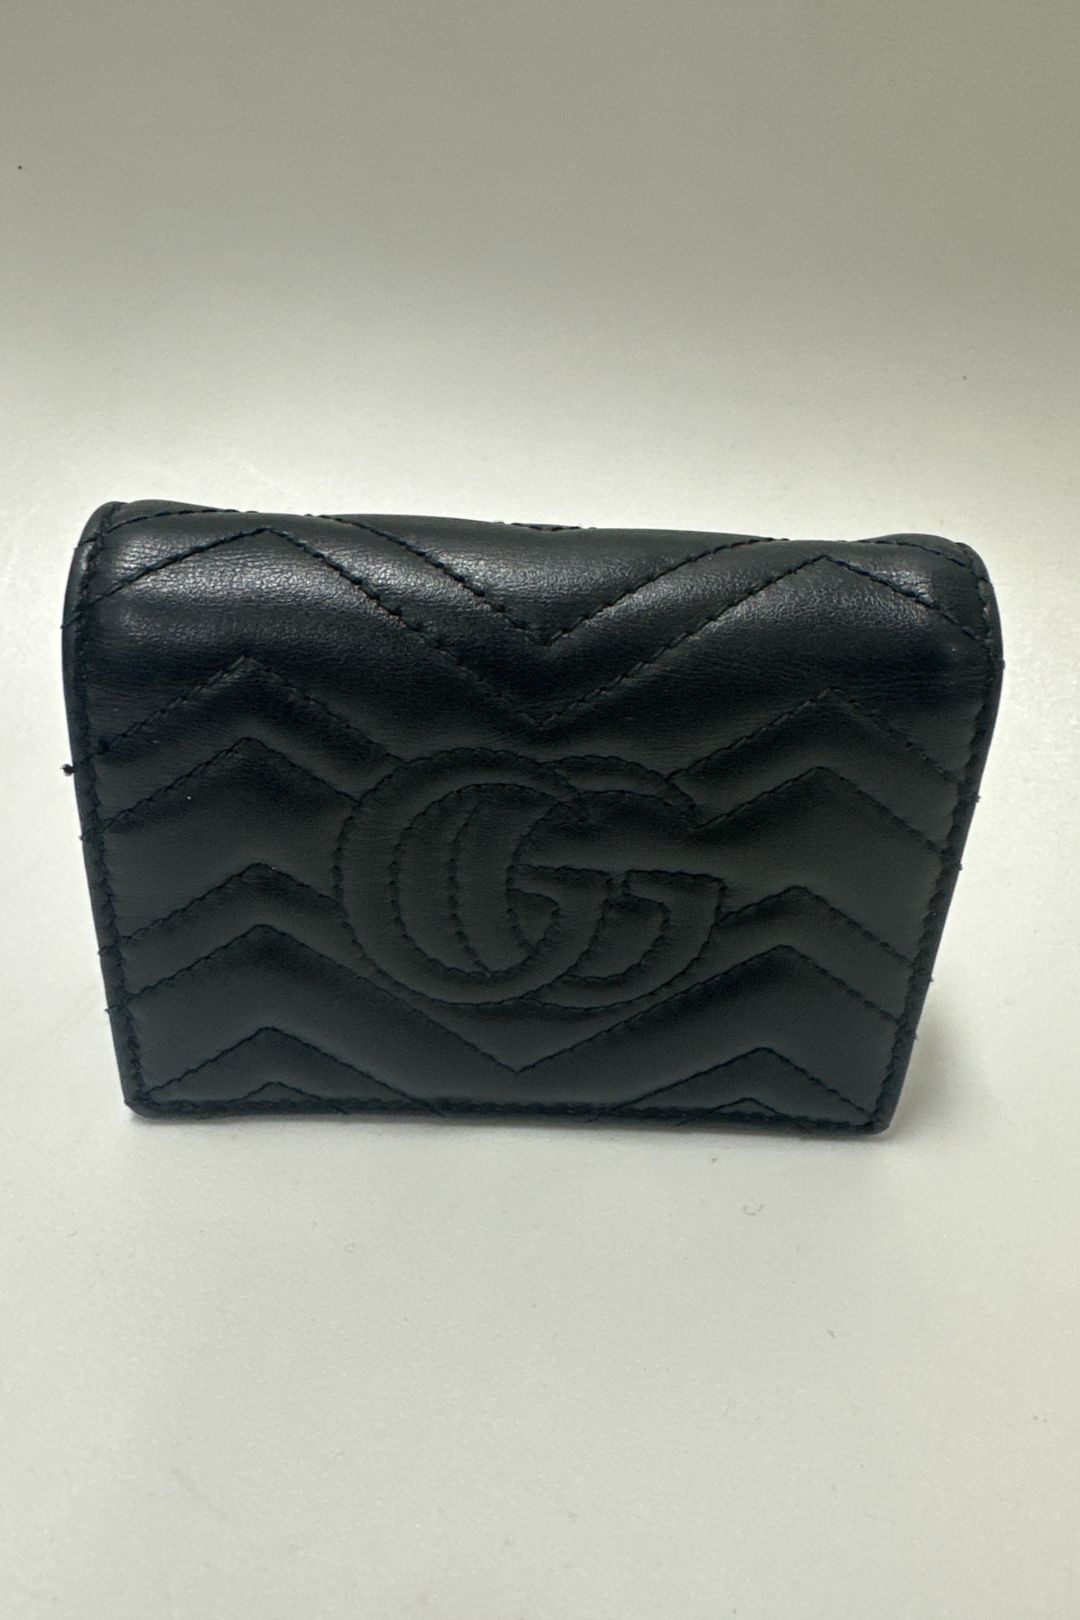 Gucci Black Leather Marmont Card Case Wallet